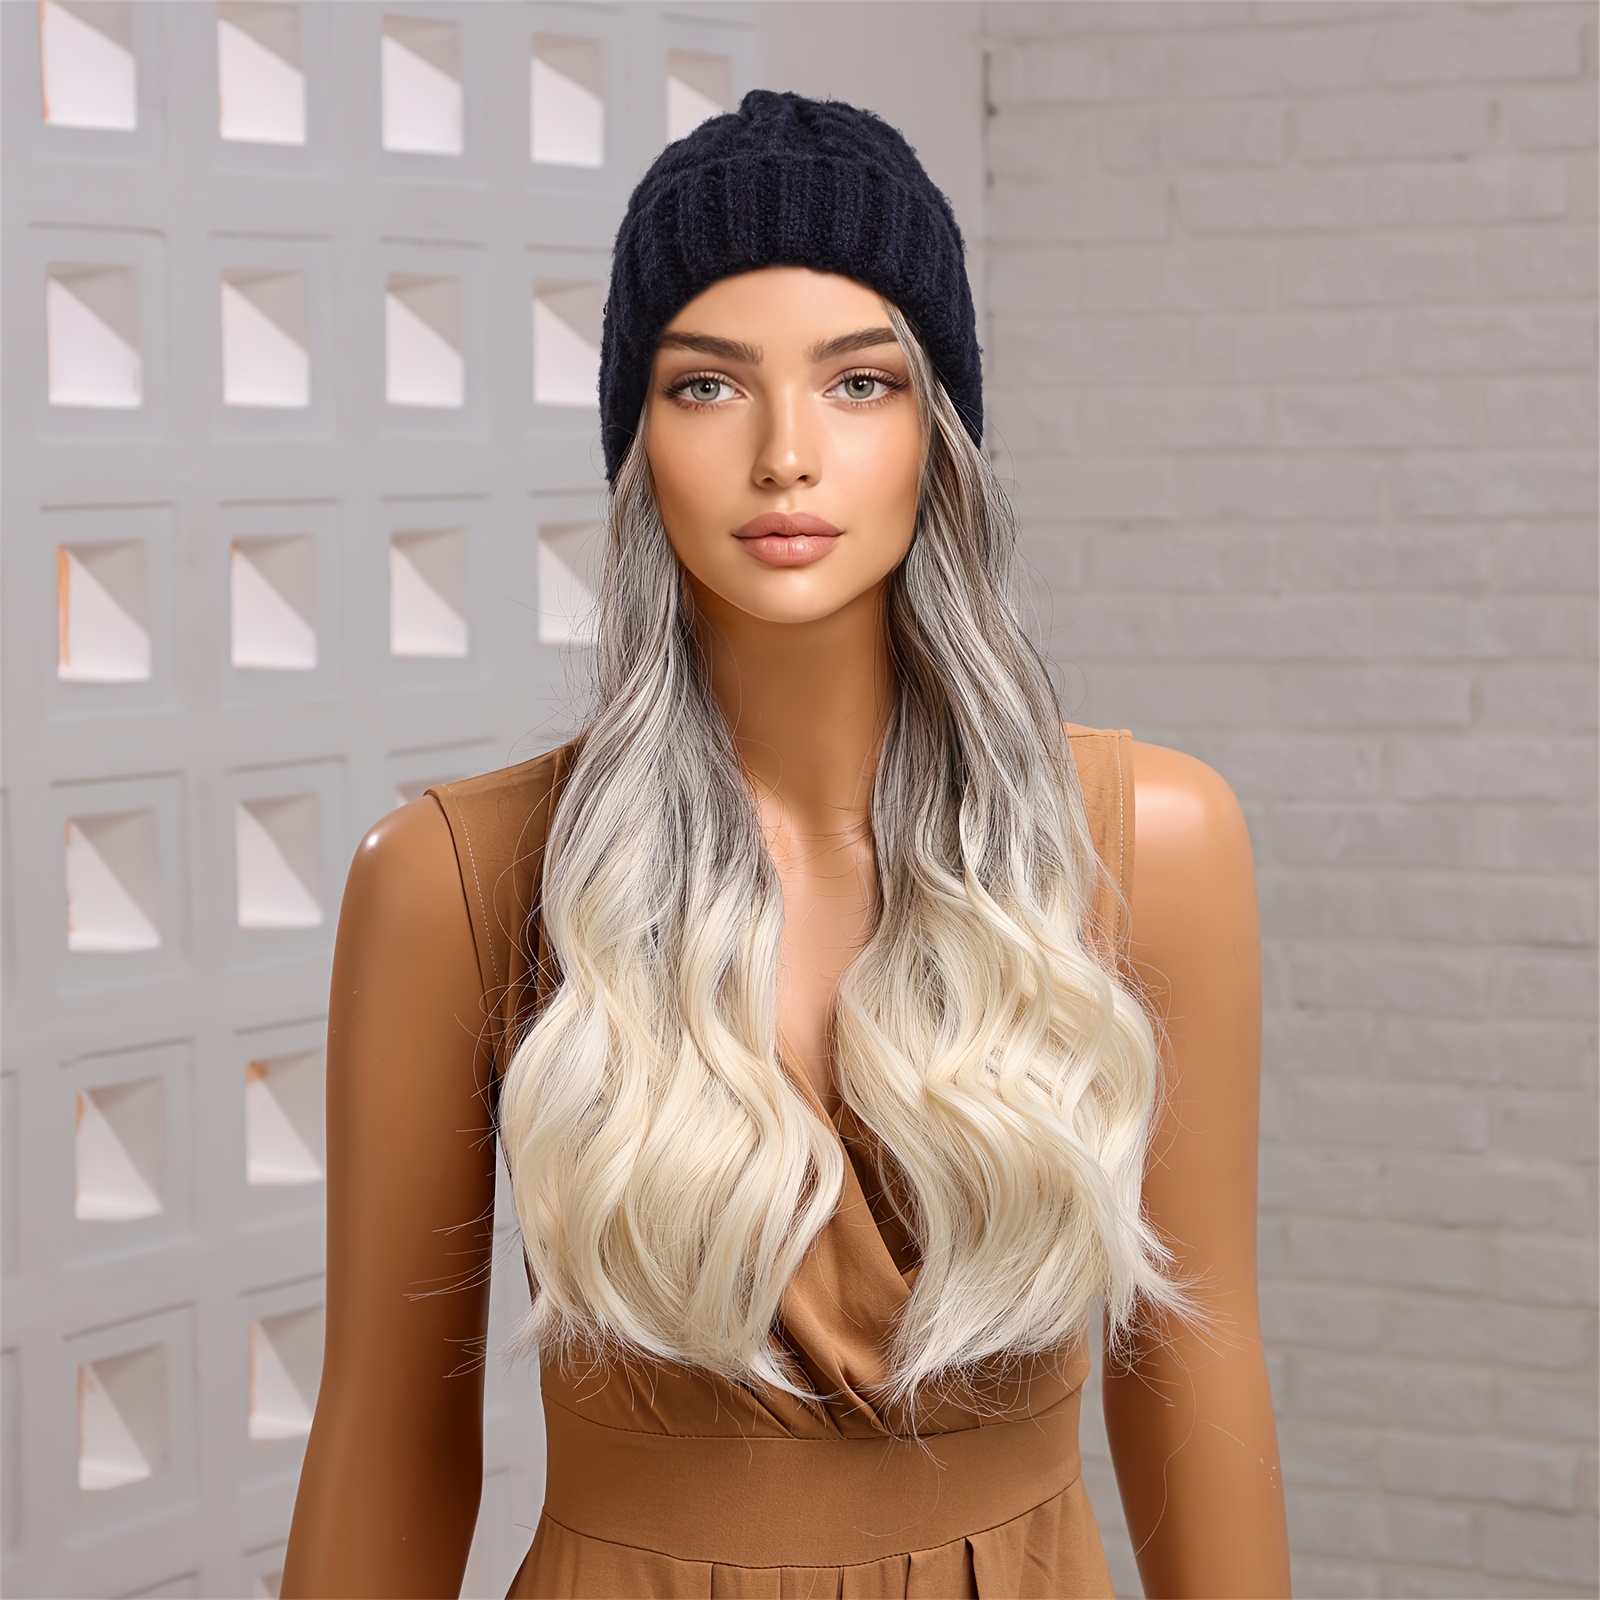 Tan Hat with 16 inch Blonde & Brown Hair Attached